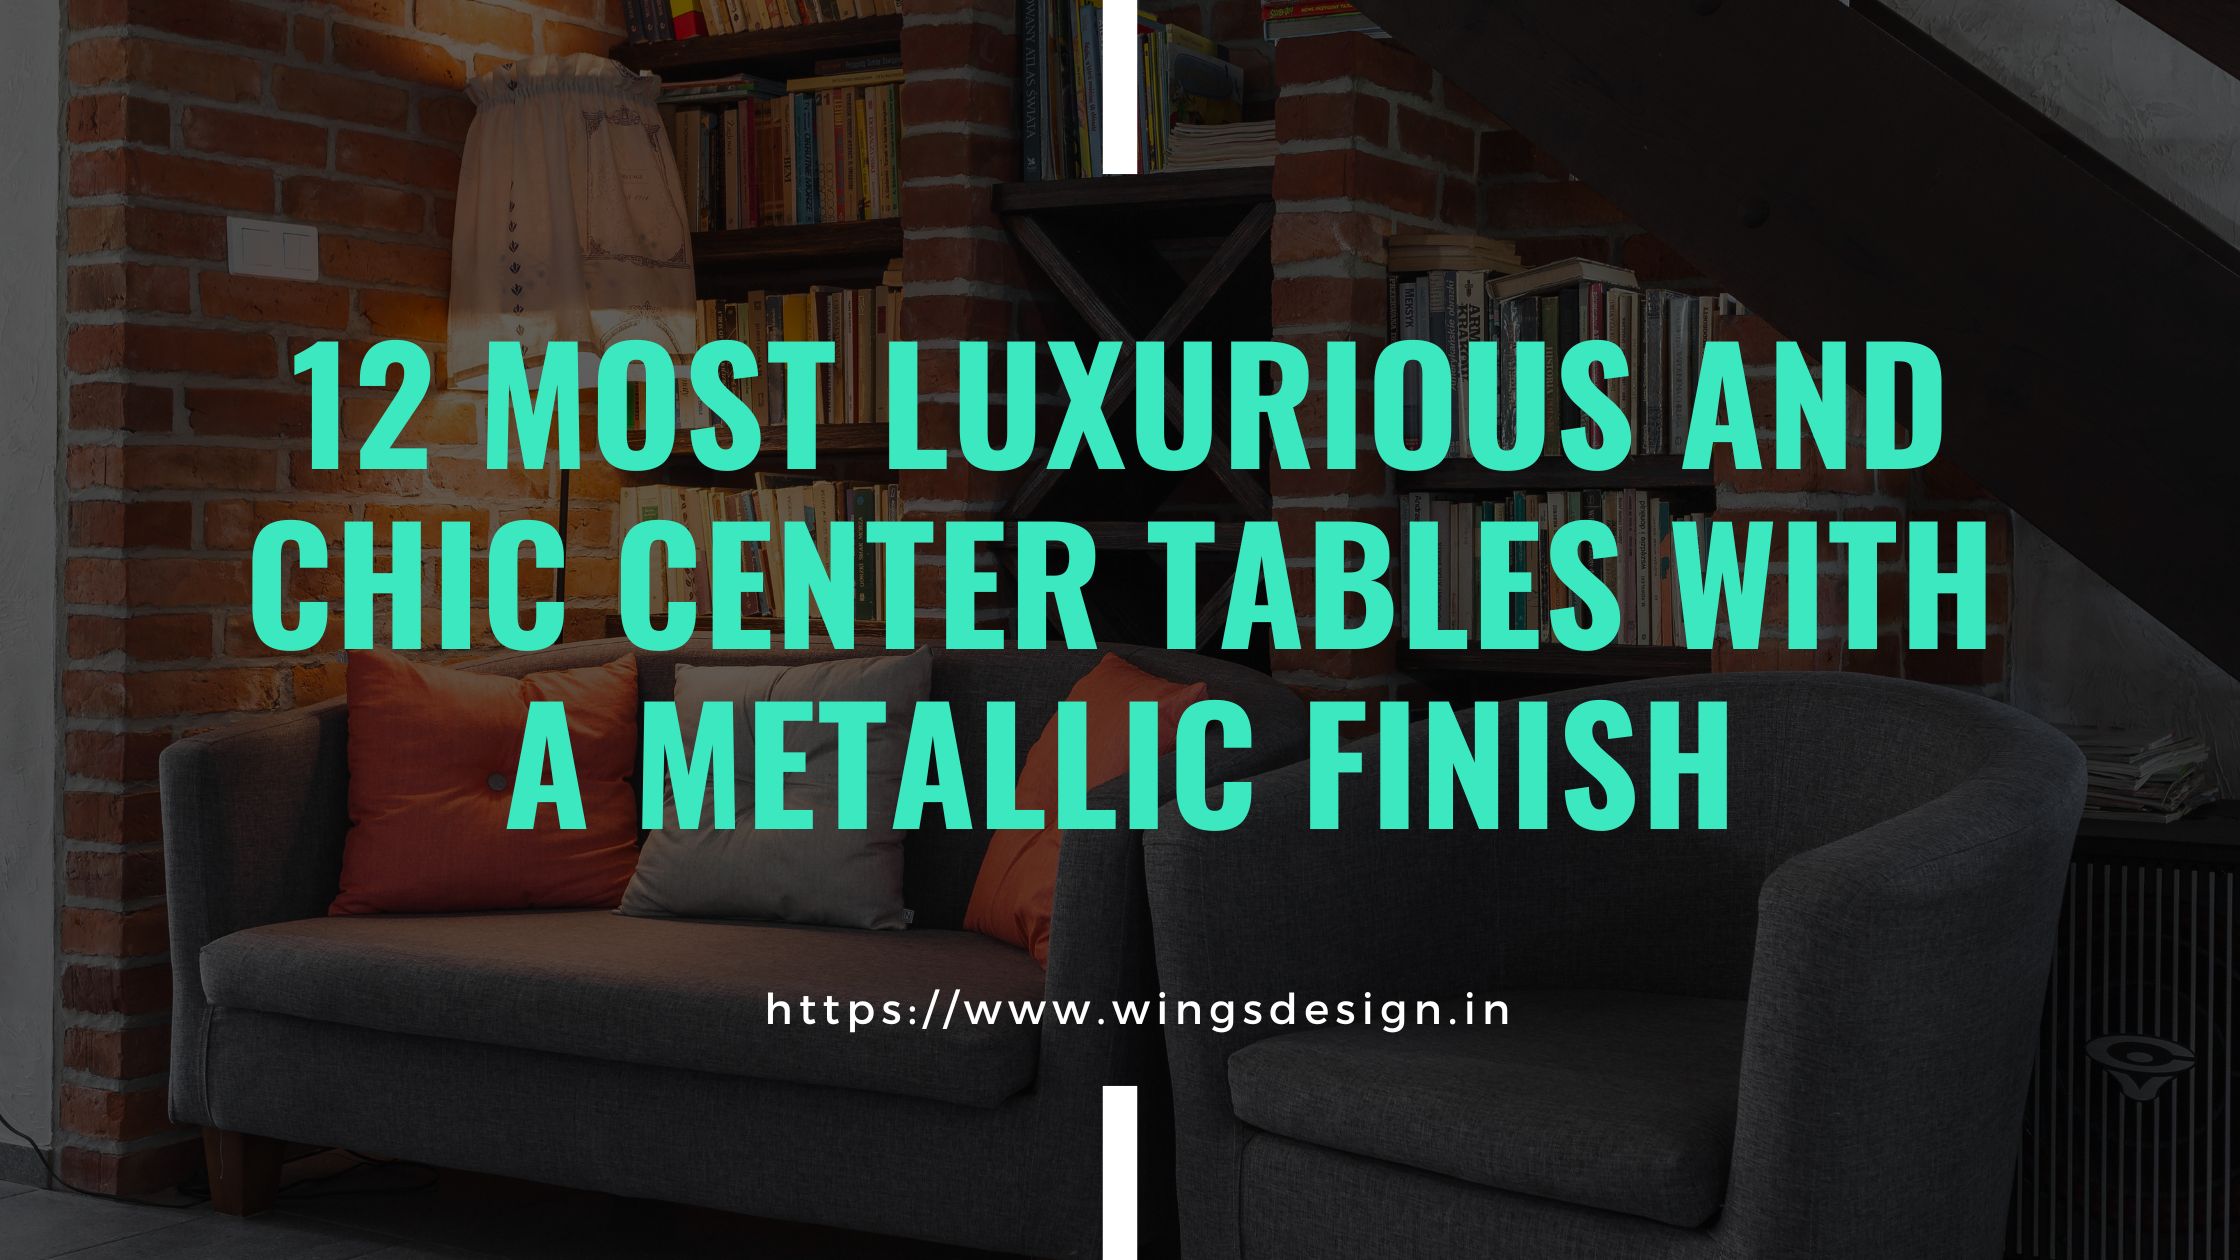 Luxury metal and center tables